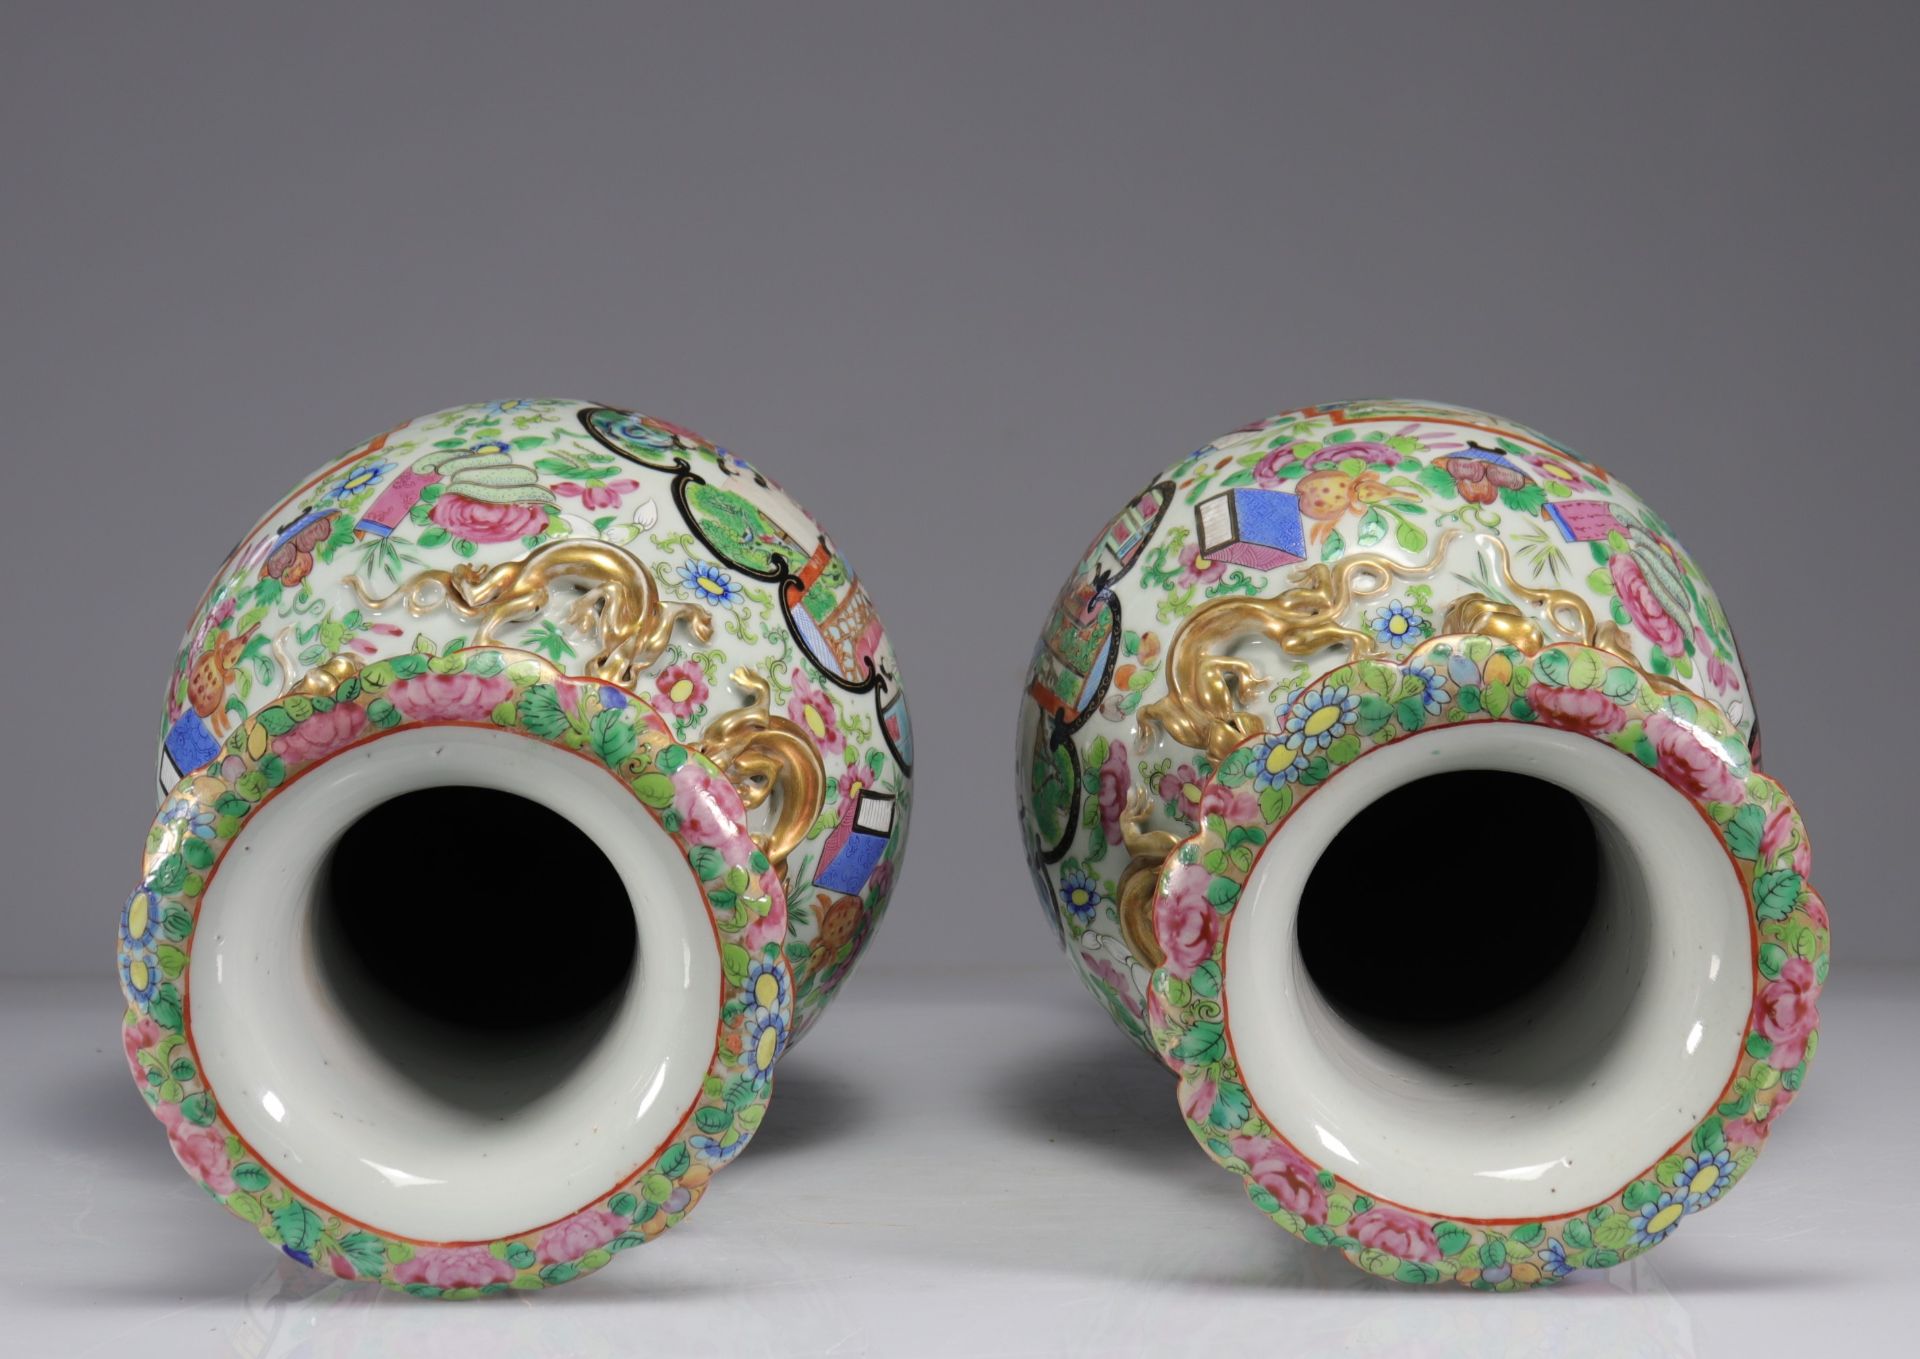 Pair of 19th century Canton porcelain vases - Image 5 of 6